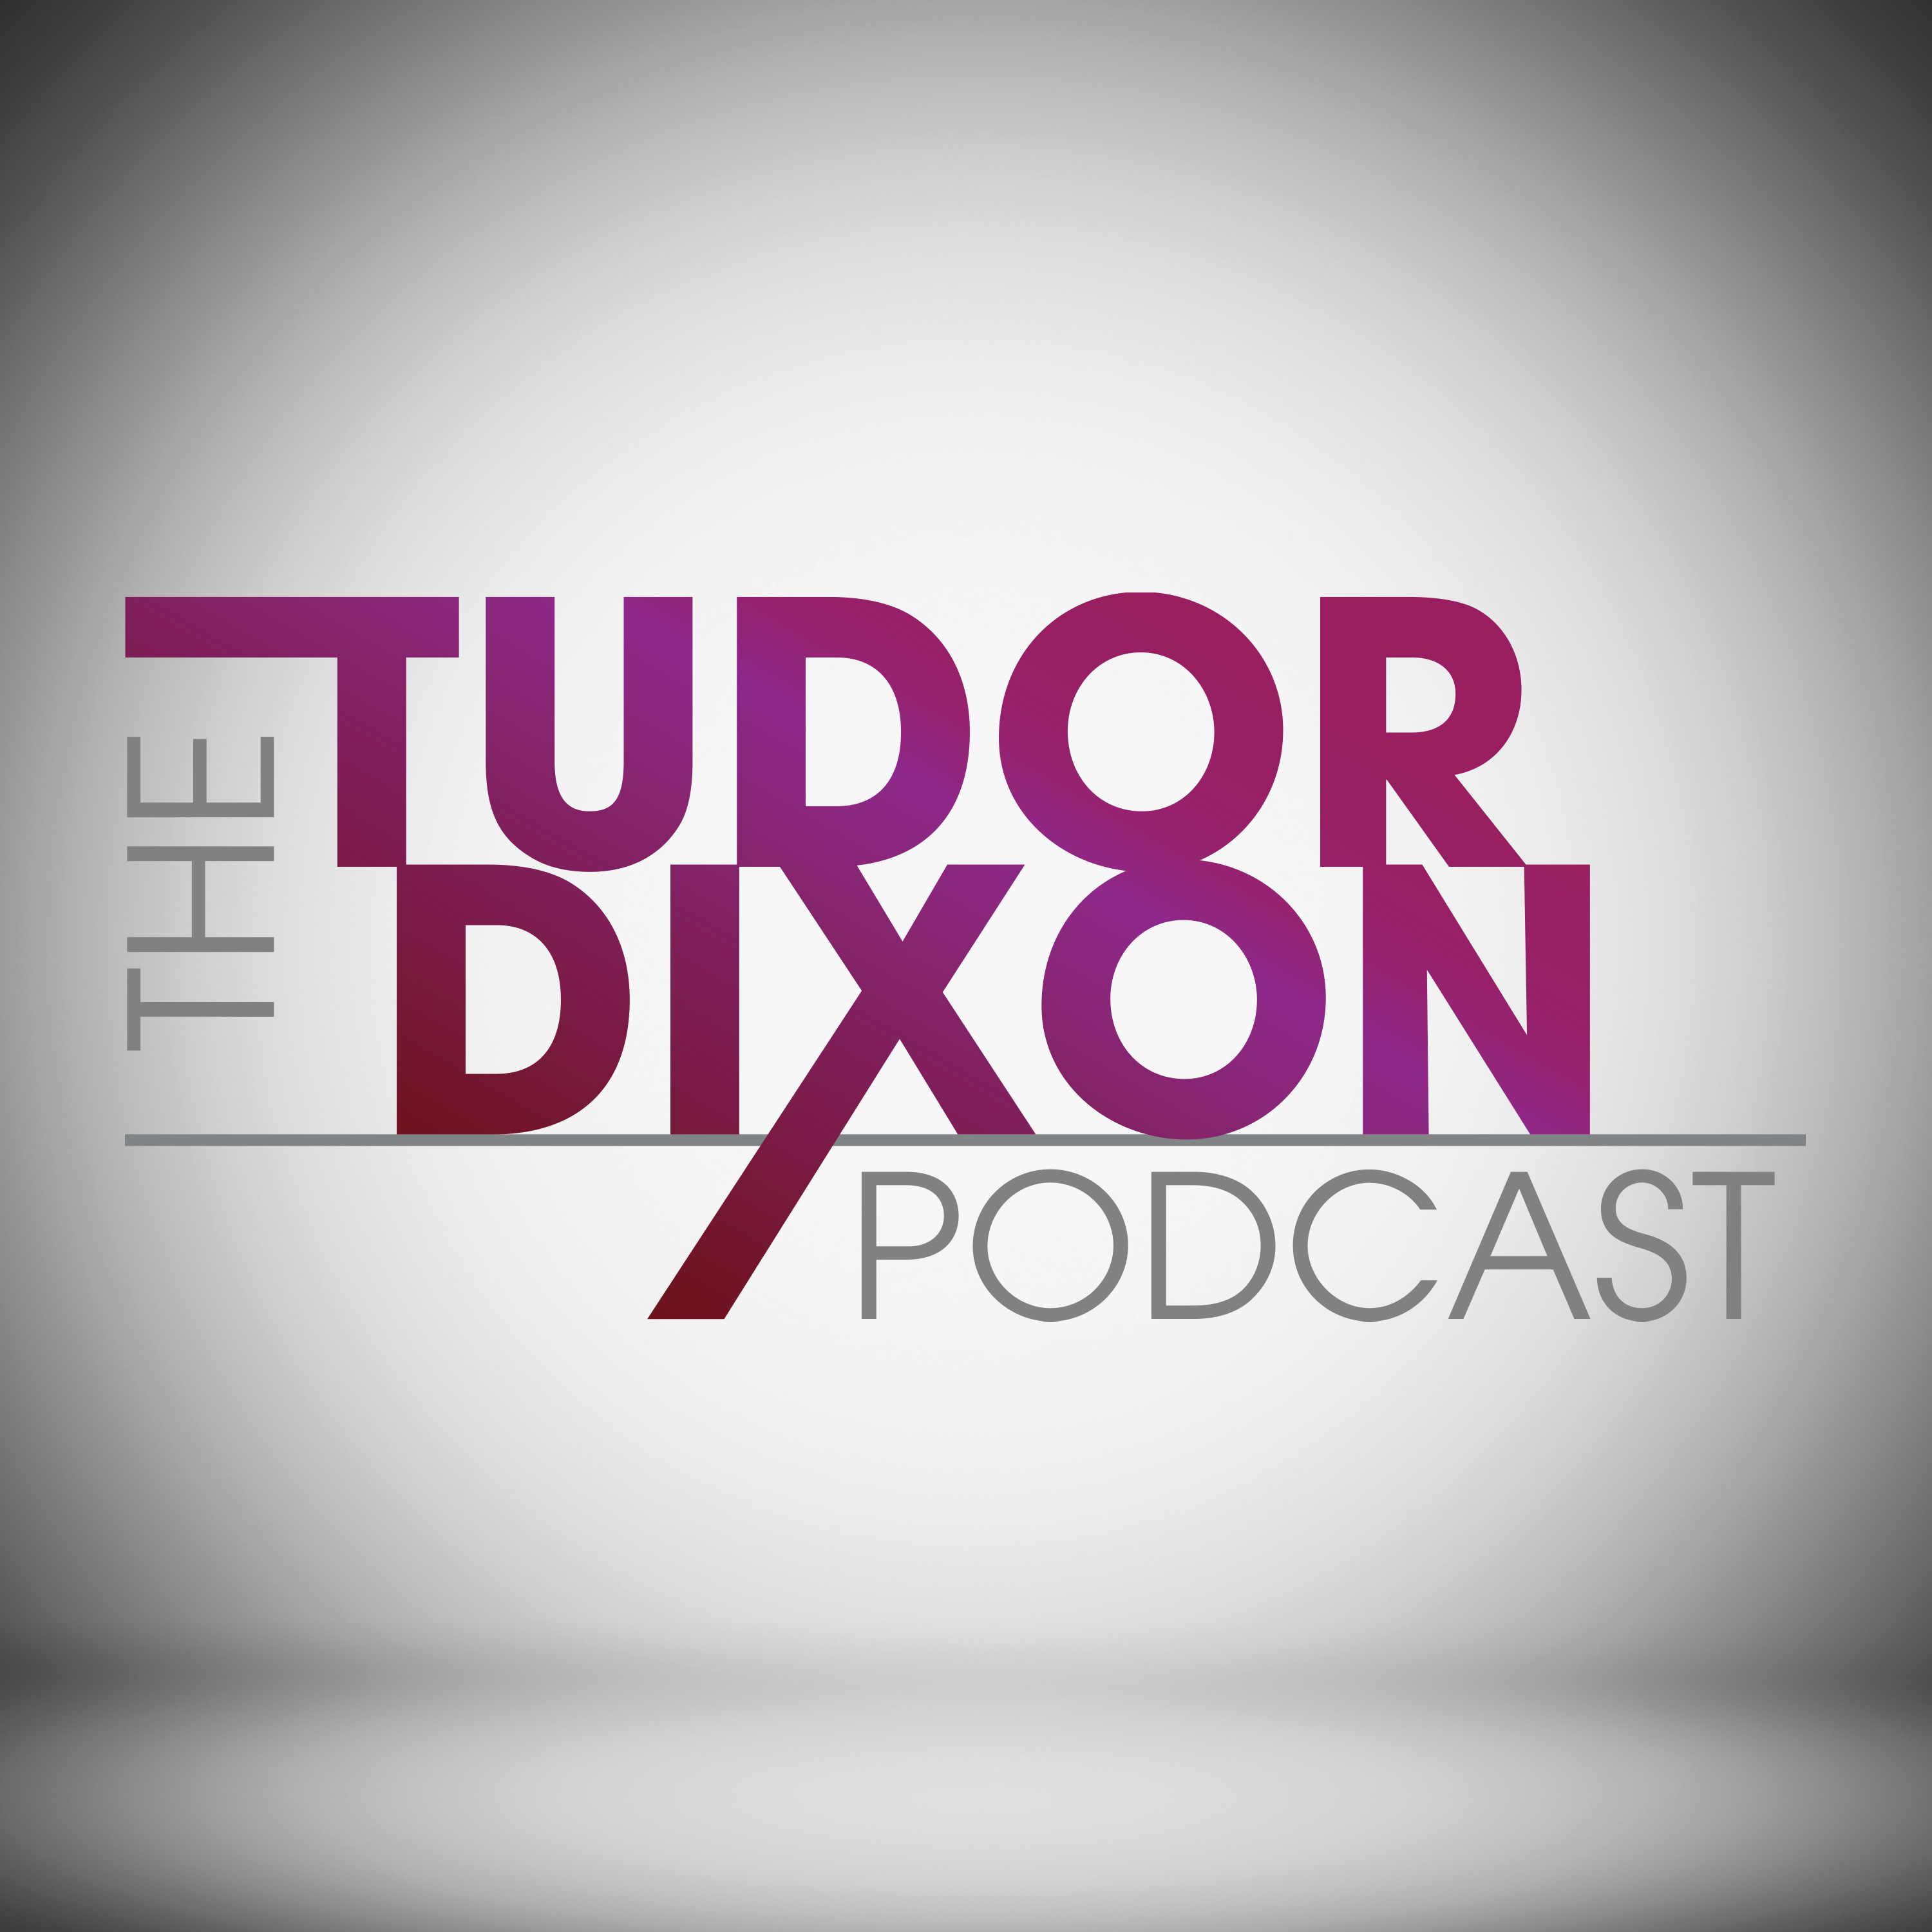 The Tudor Dixon Podcast: Teaching Our Children the Right Way.